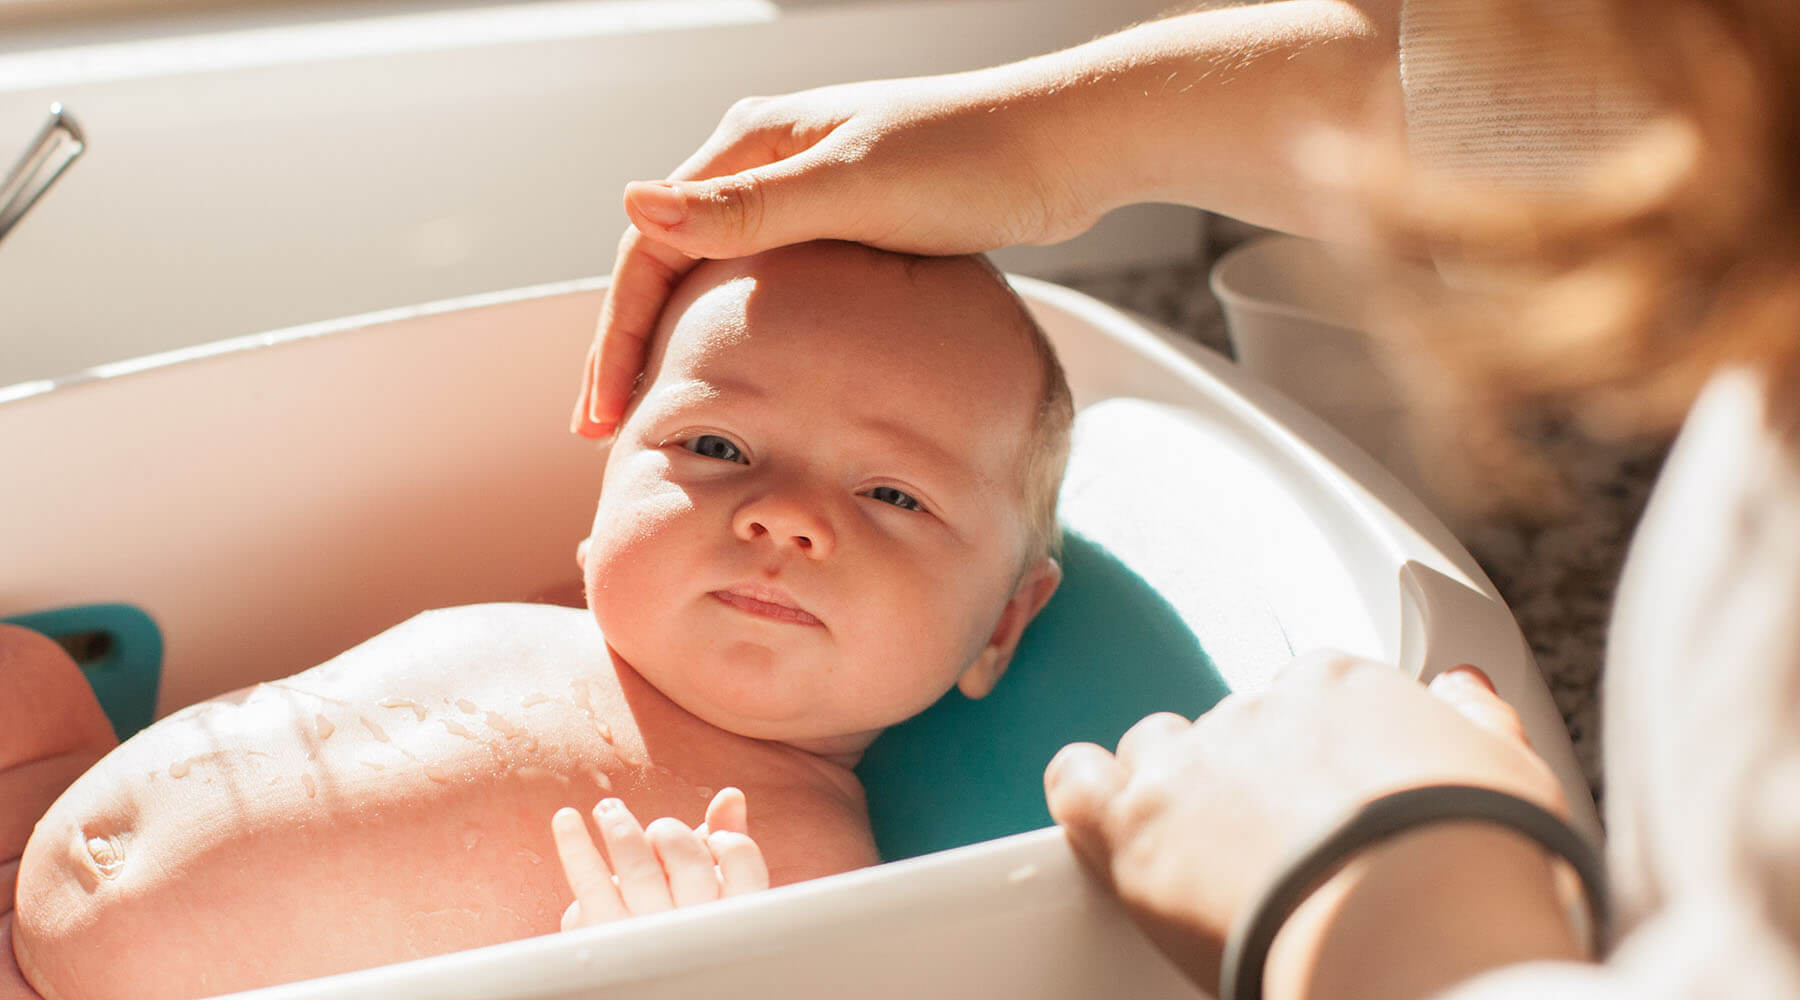 Baby with dry skin in tub